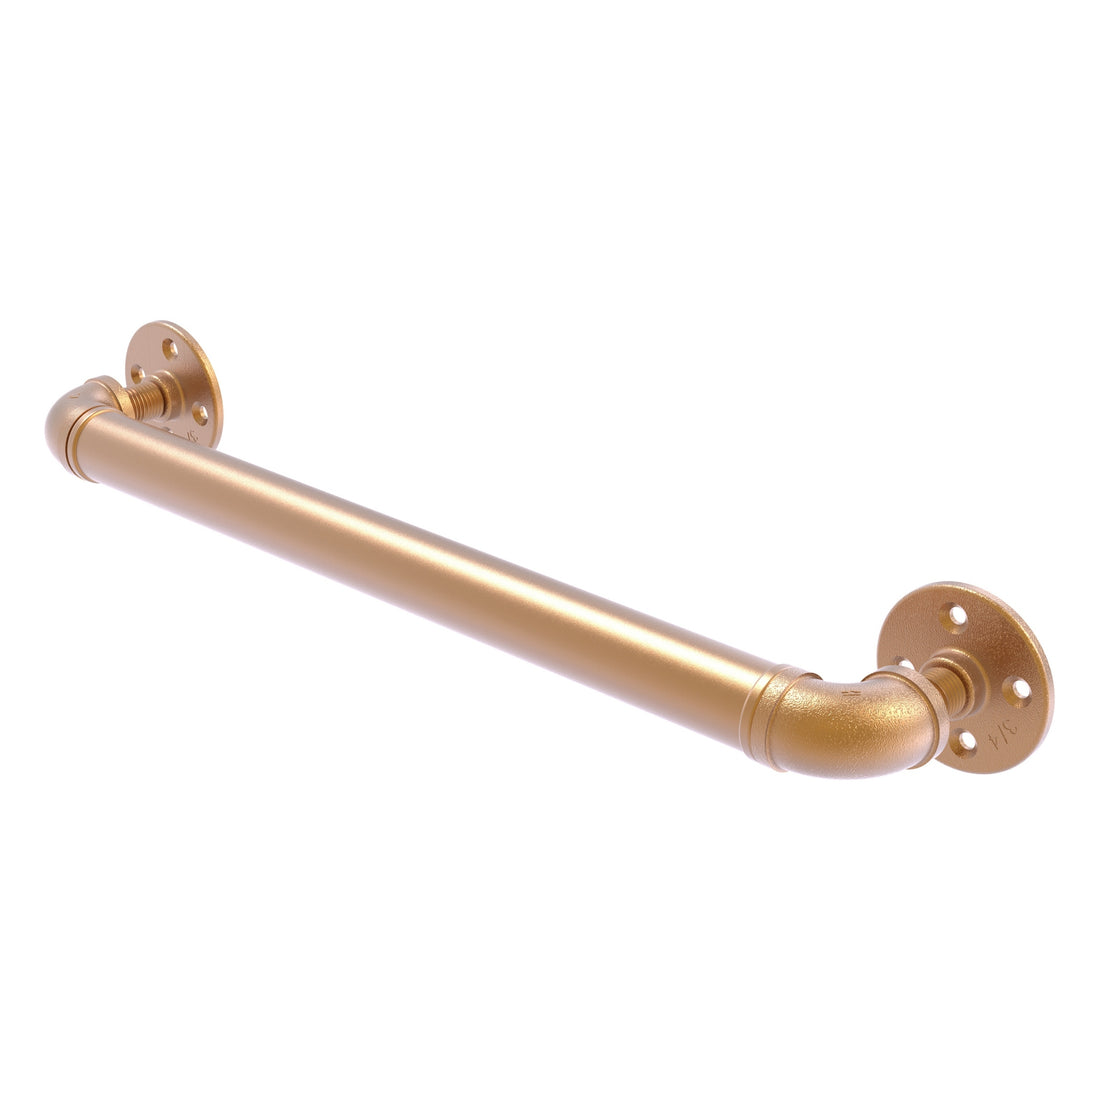 Allied Brass Shower Squeegee with Smooth Handle - Antique Bronze